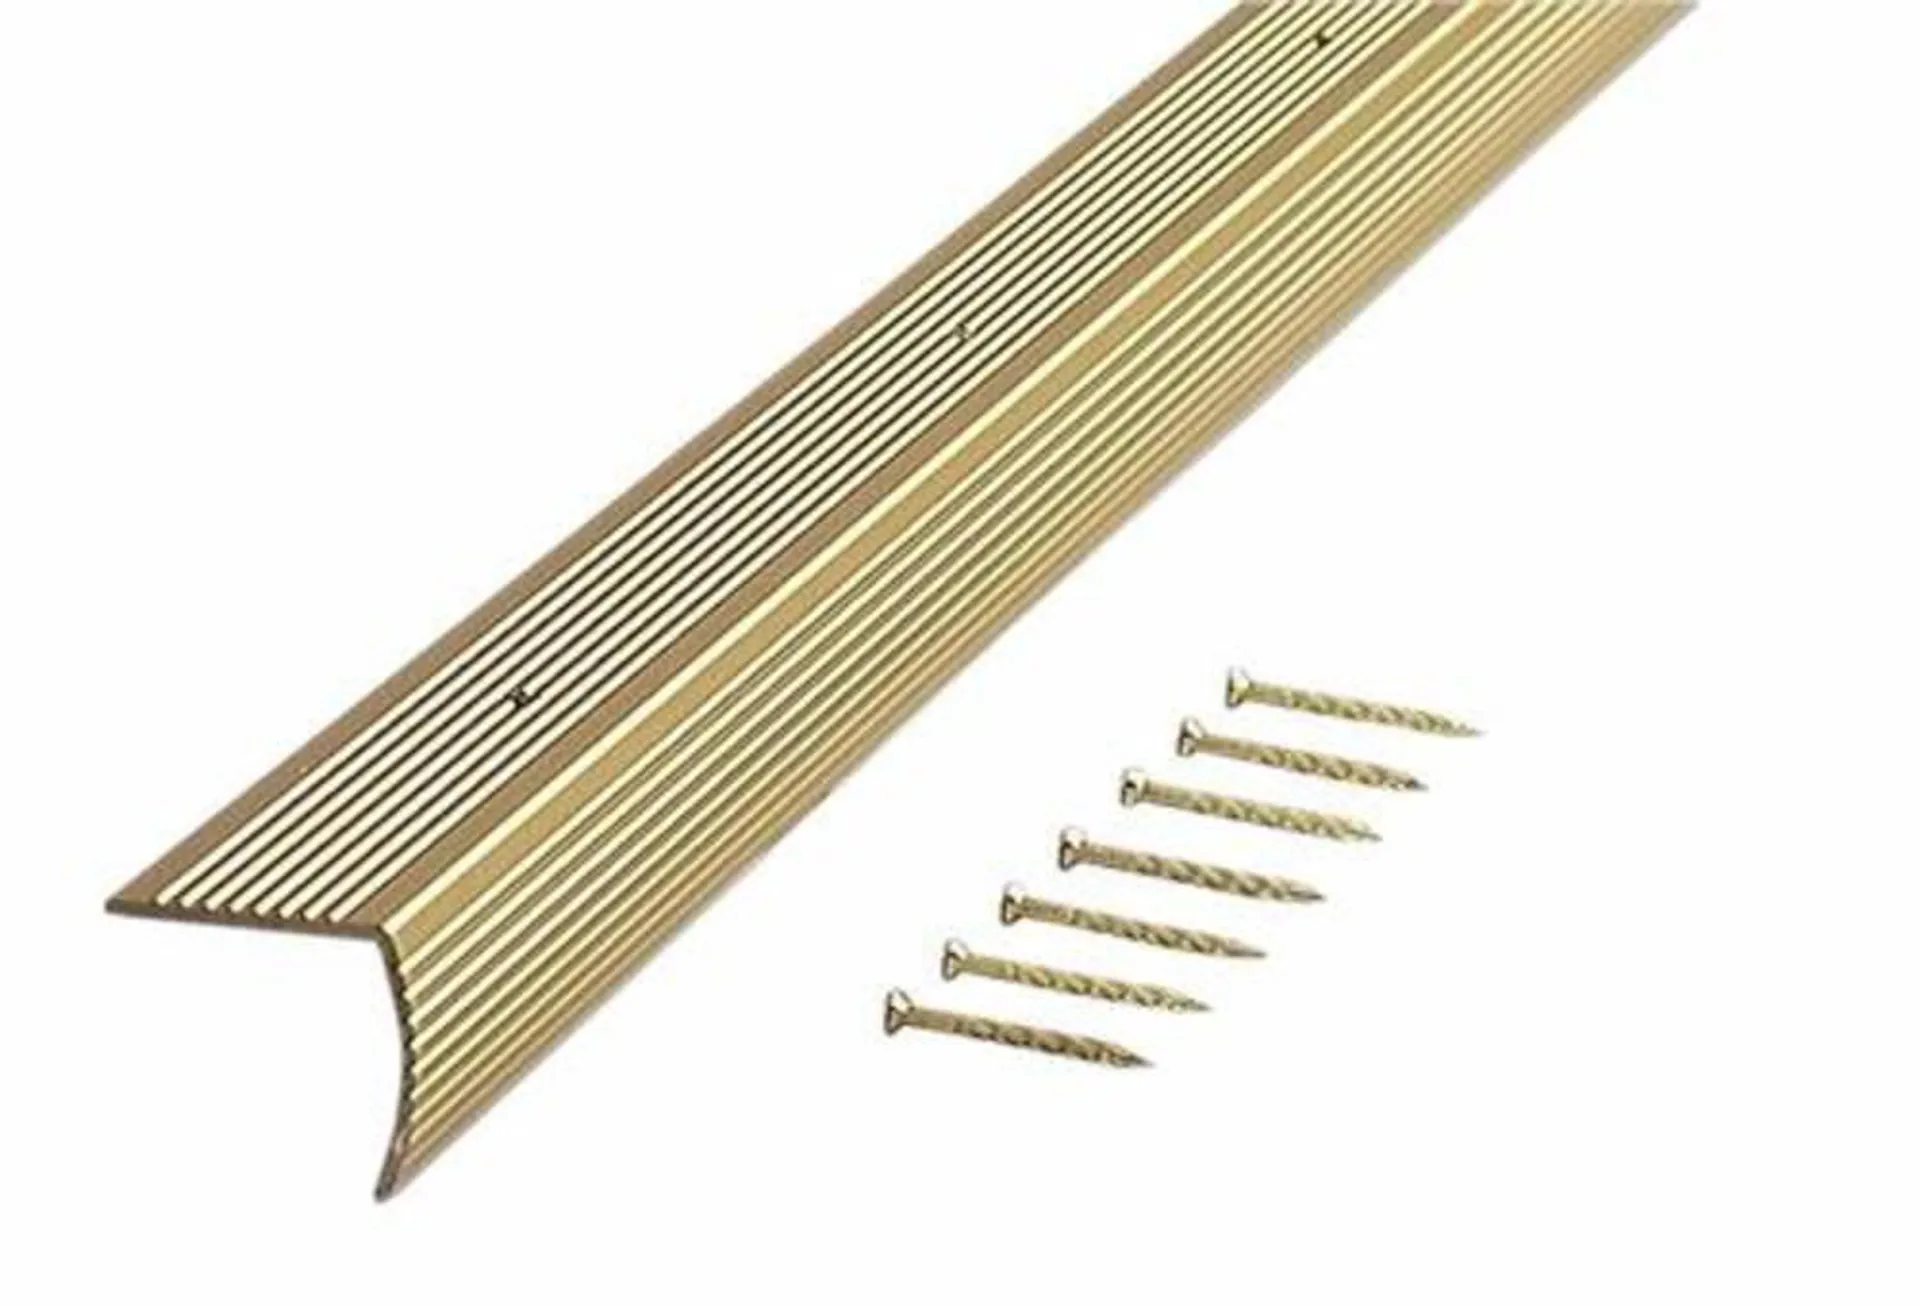 M-D Building Products® Satin Brass 1-1/8" x 1-1/8" x 72" Fluted Stair Edging